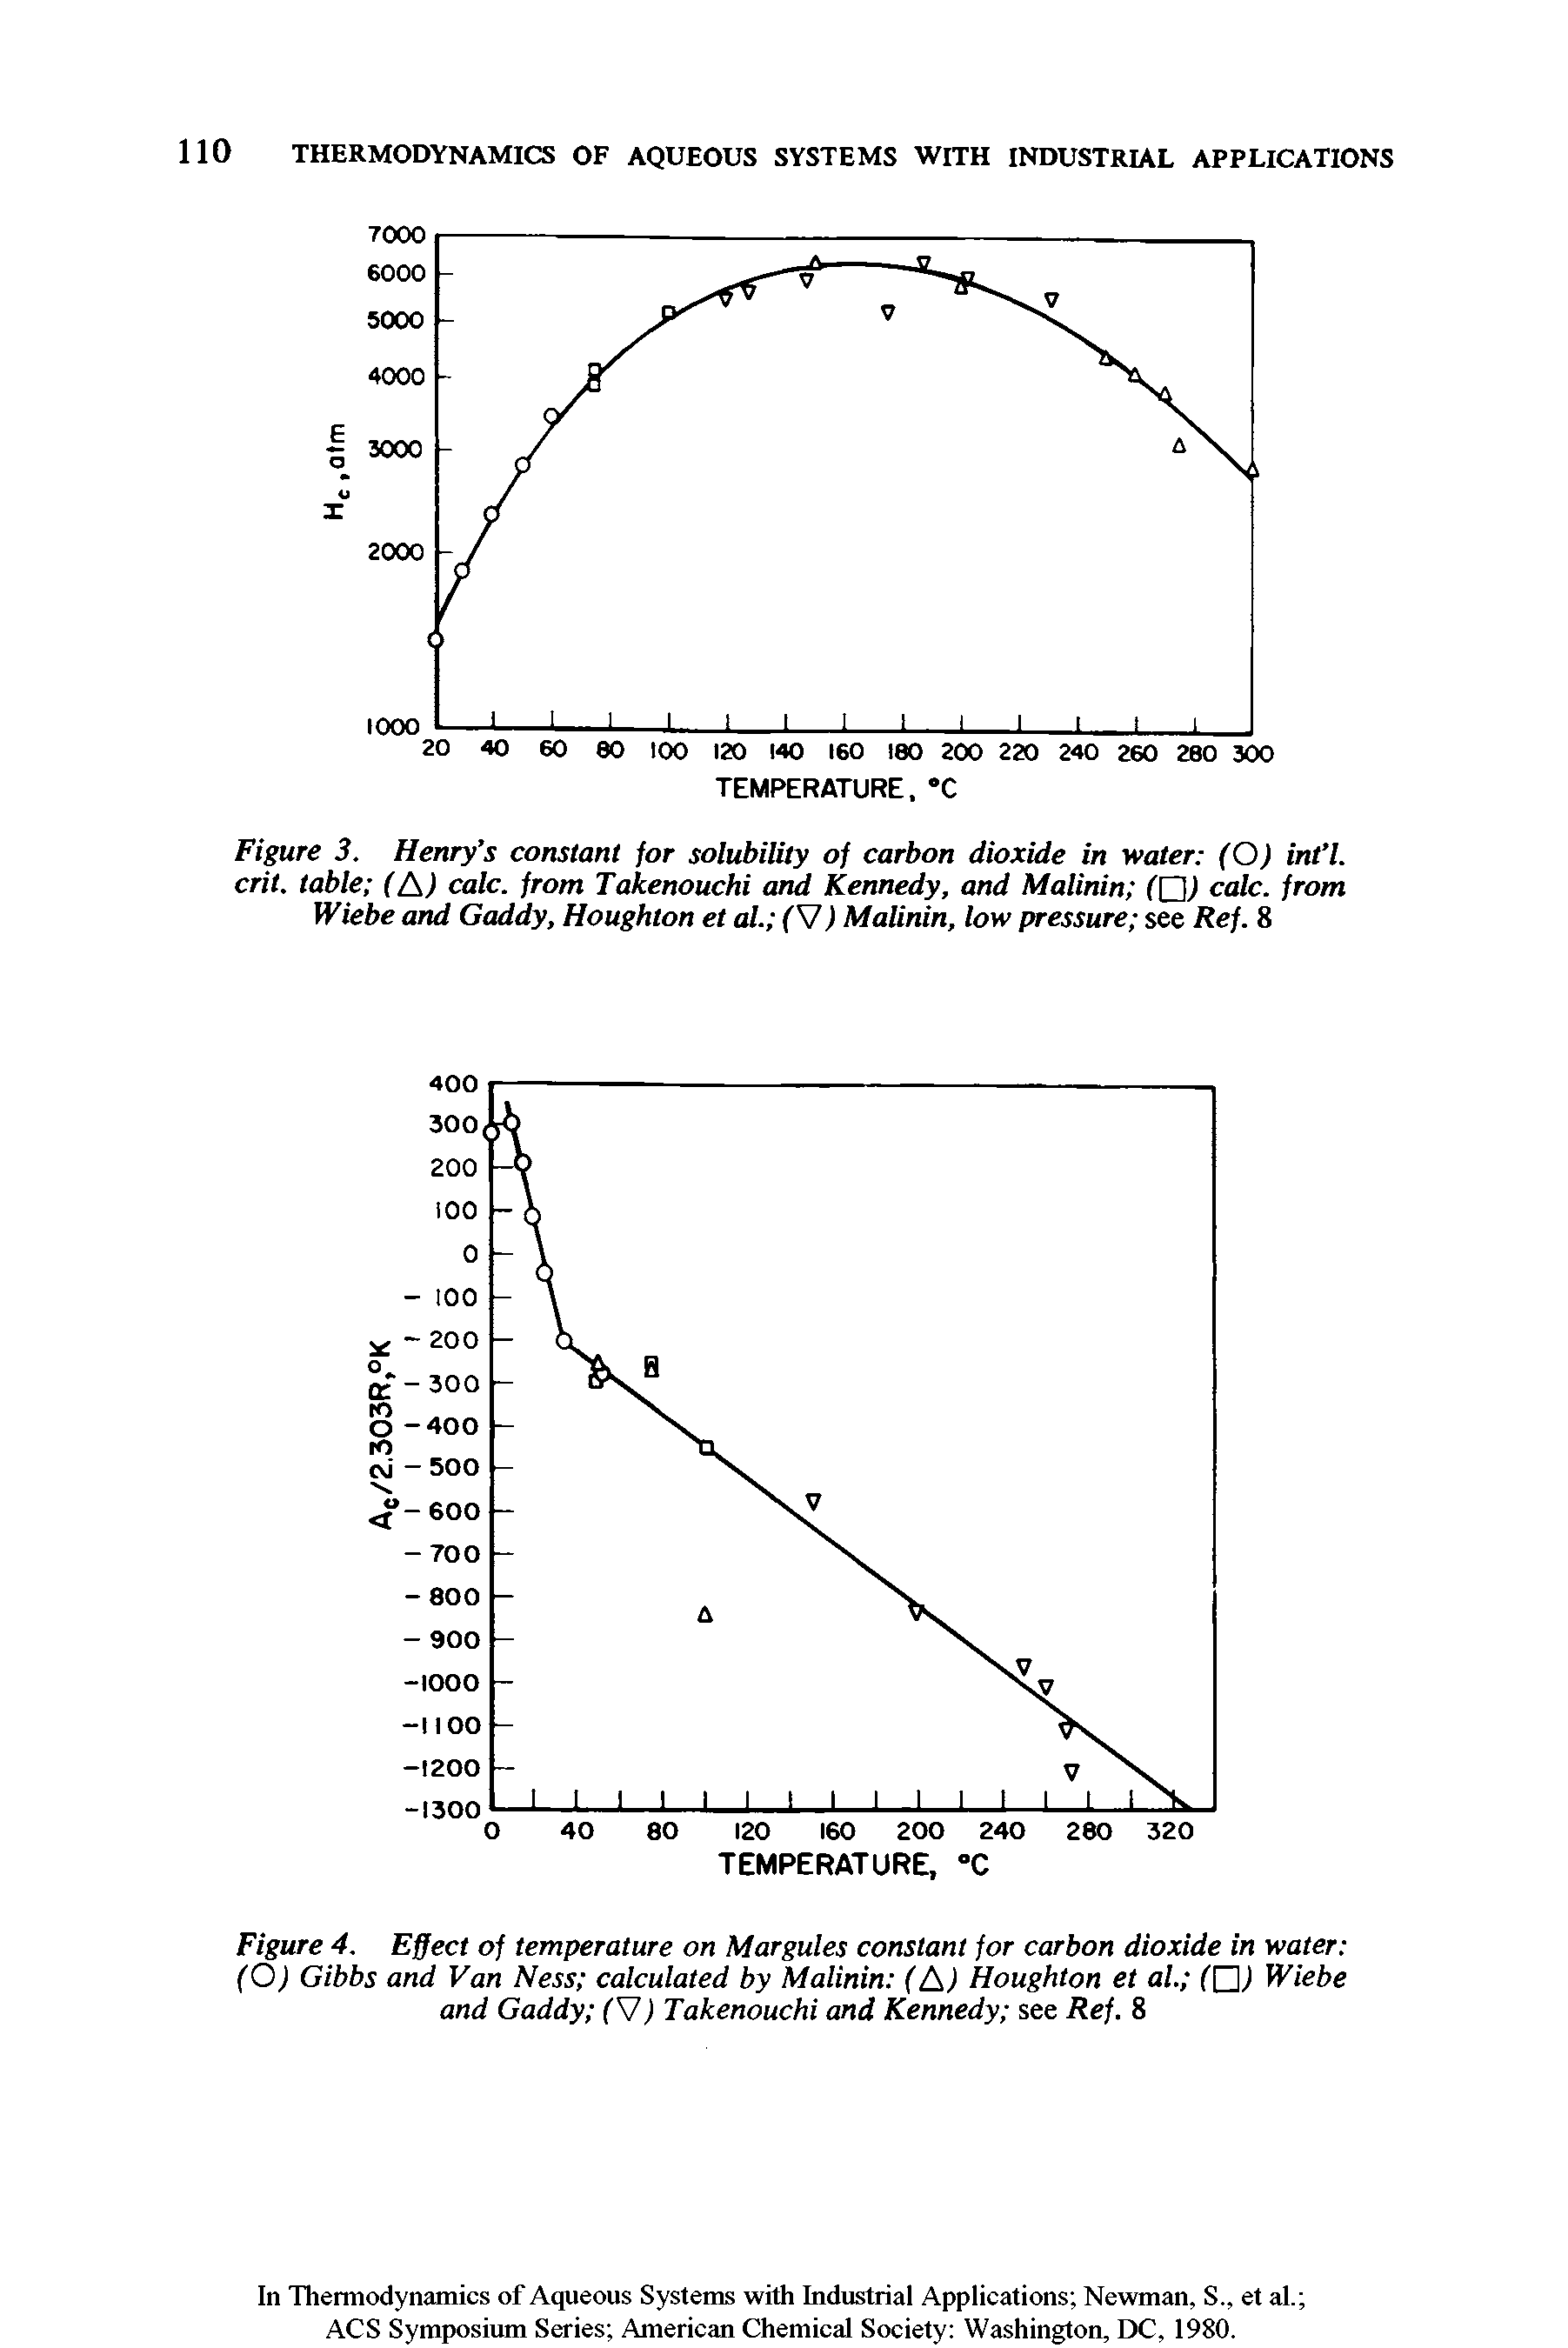 Figure 3. Henry s constant for solubility of carbon dioxide in water (O) int l. crit. table (A) calc, from Takenouchi and Kennedy, and Malinin (Q) calc, from Wiebe and Gaddy, Houghton et al. (V) Malinin, low pressure see Ref. 8...